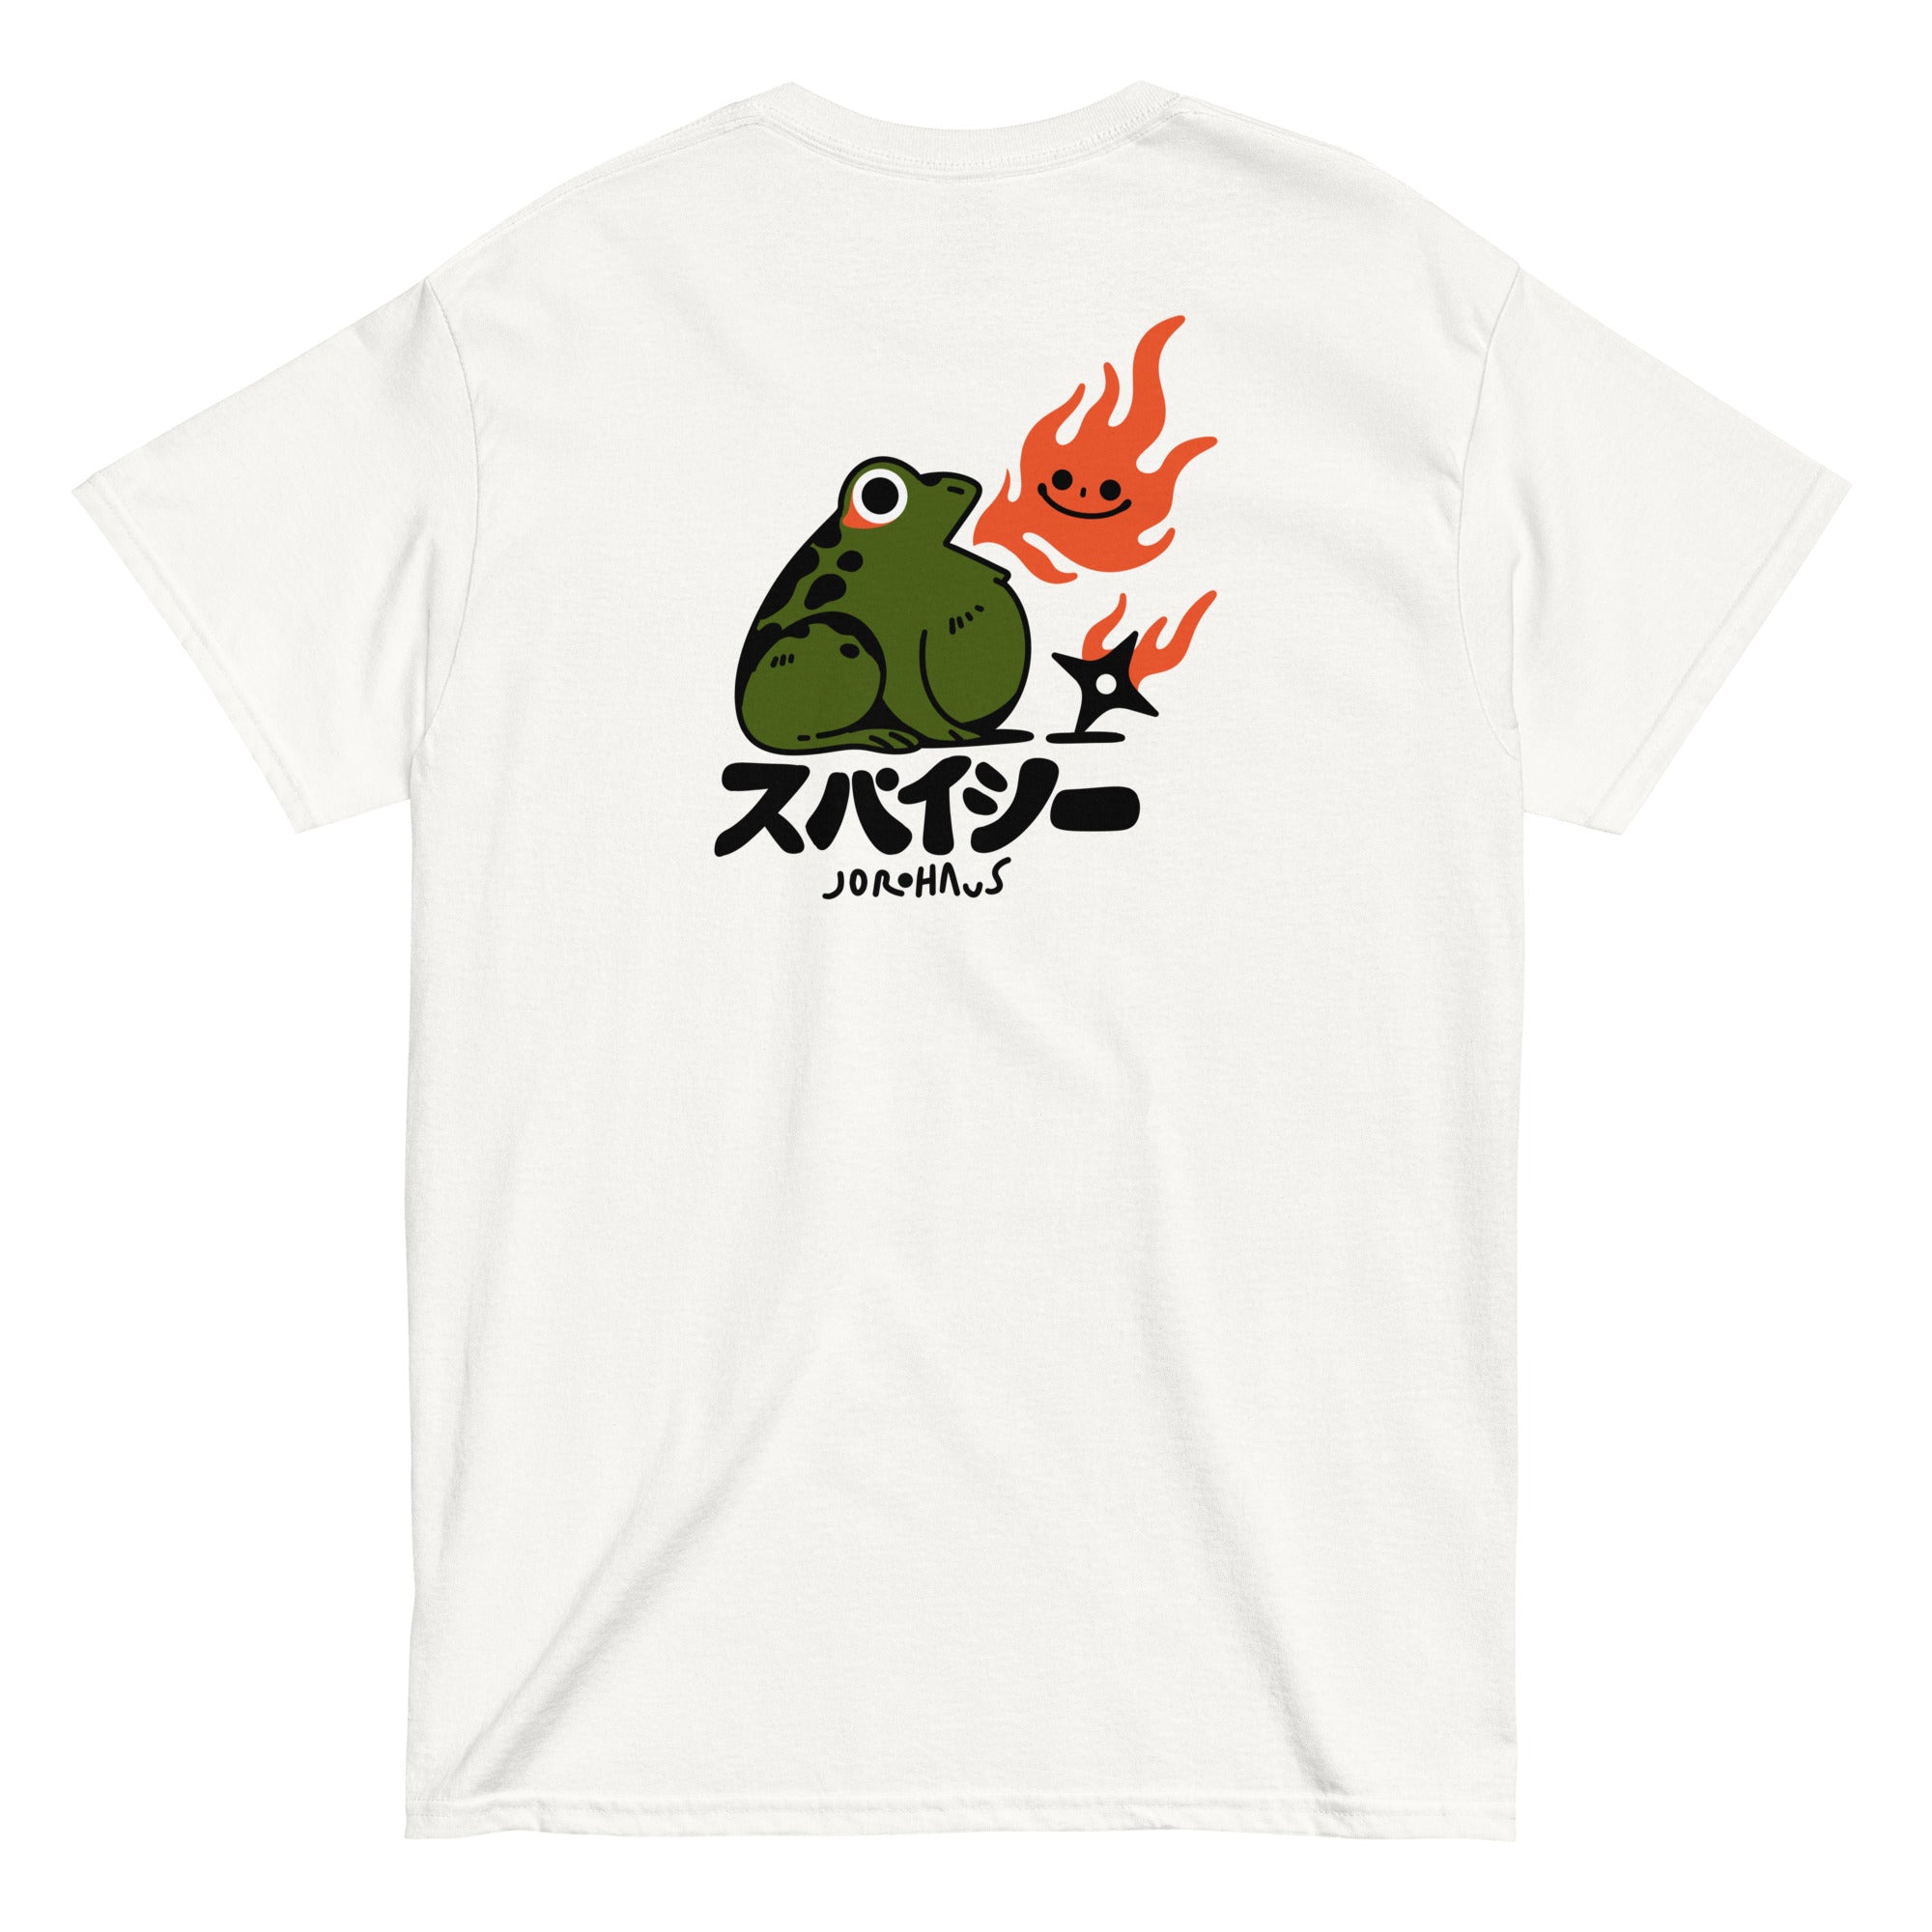 Spicy classic tee